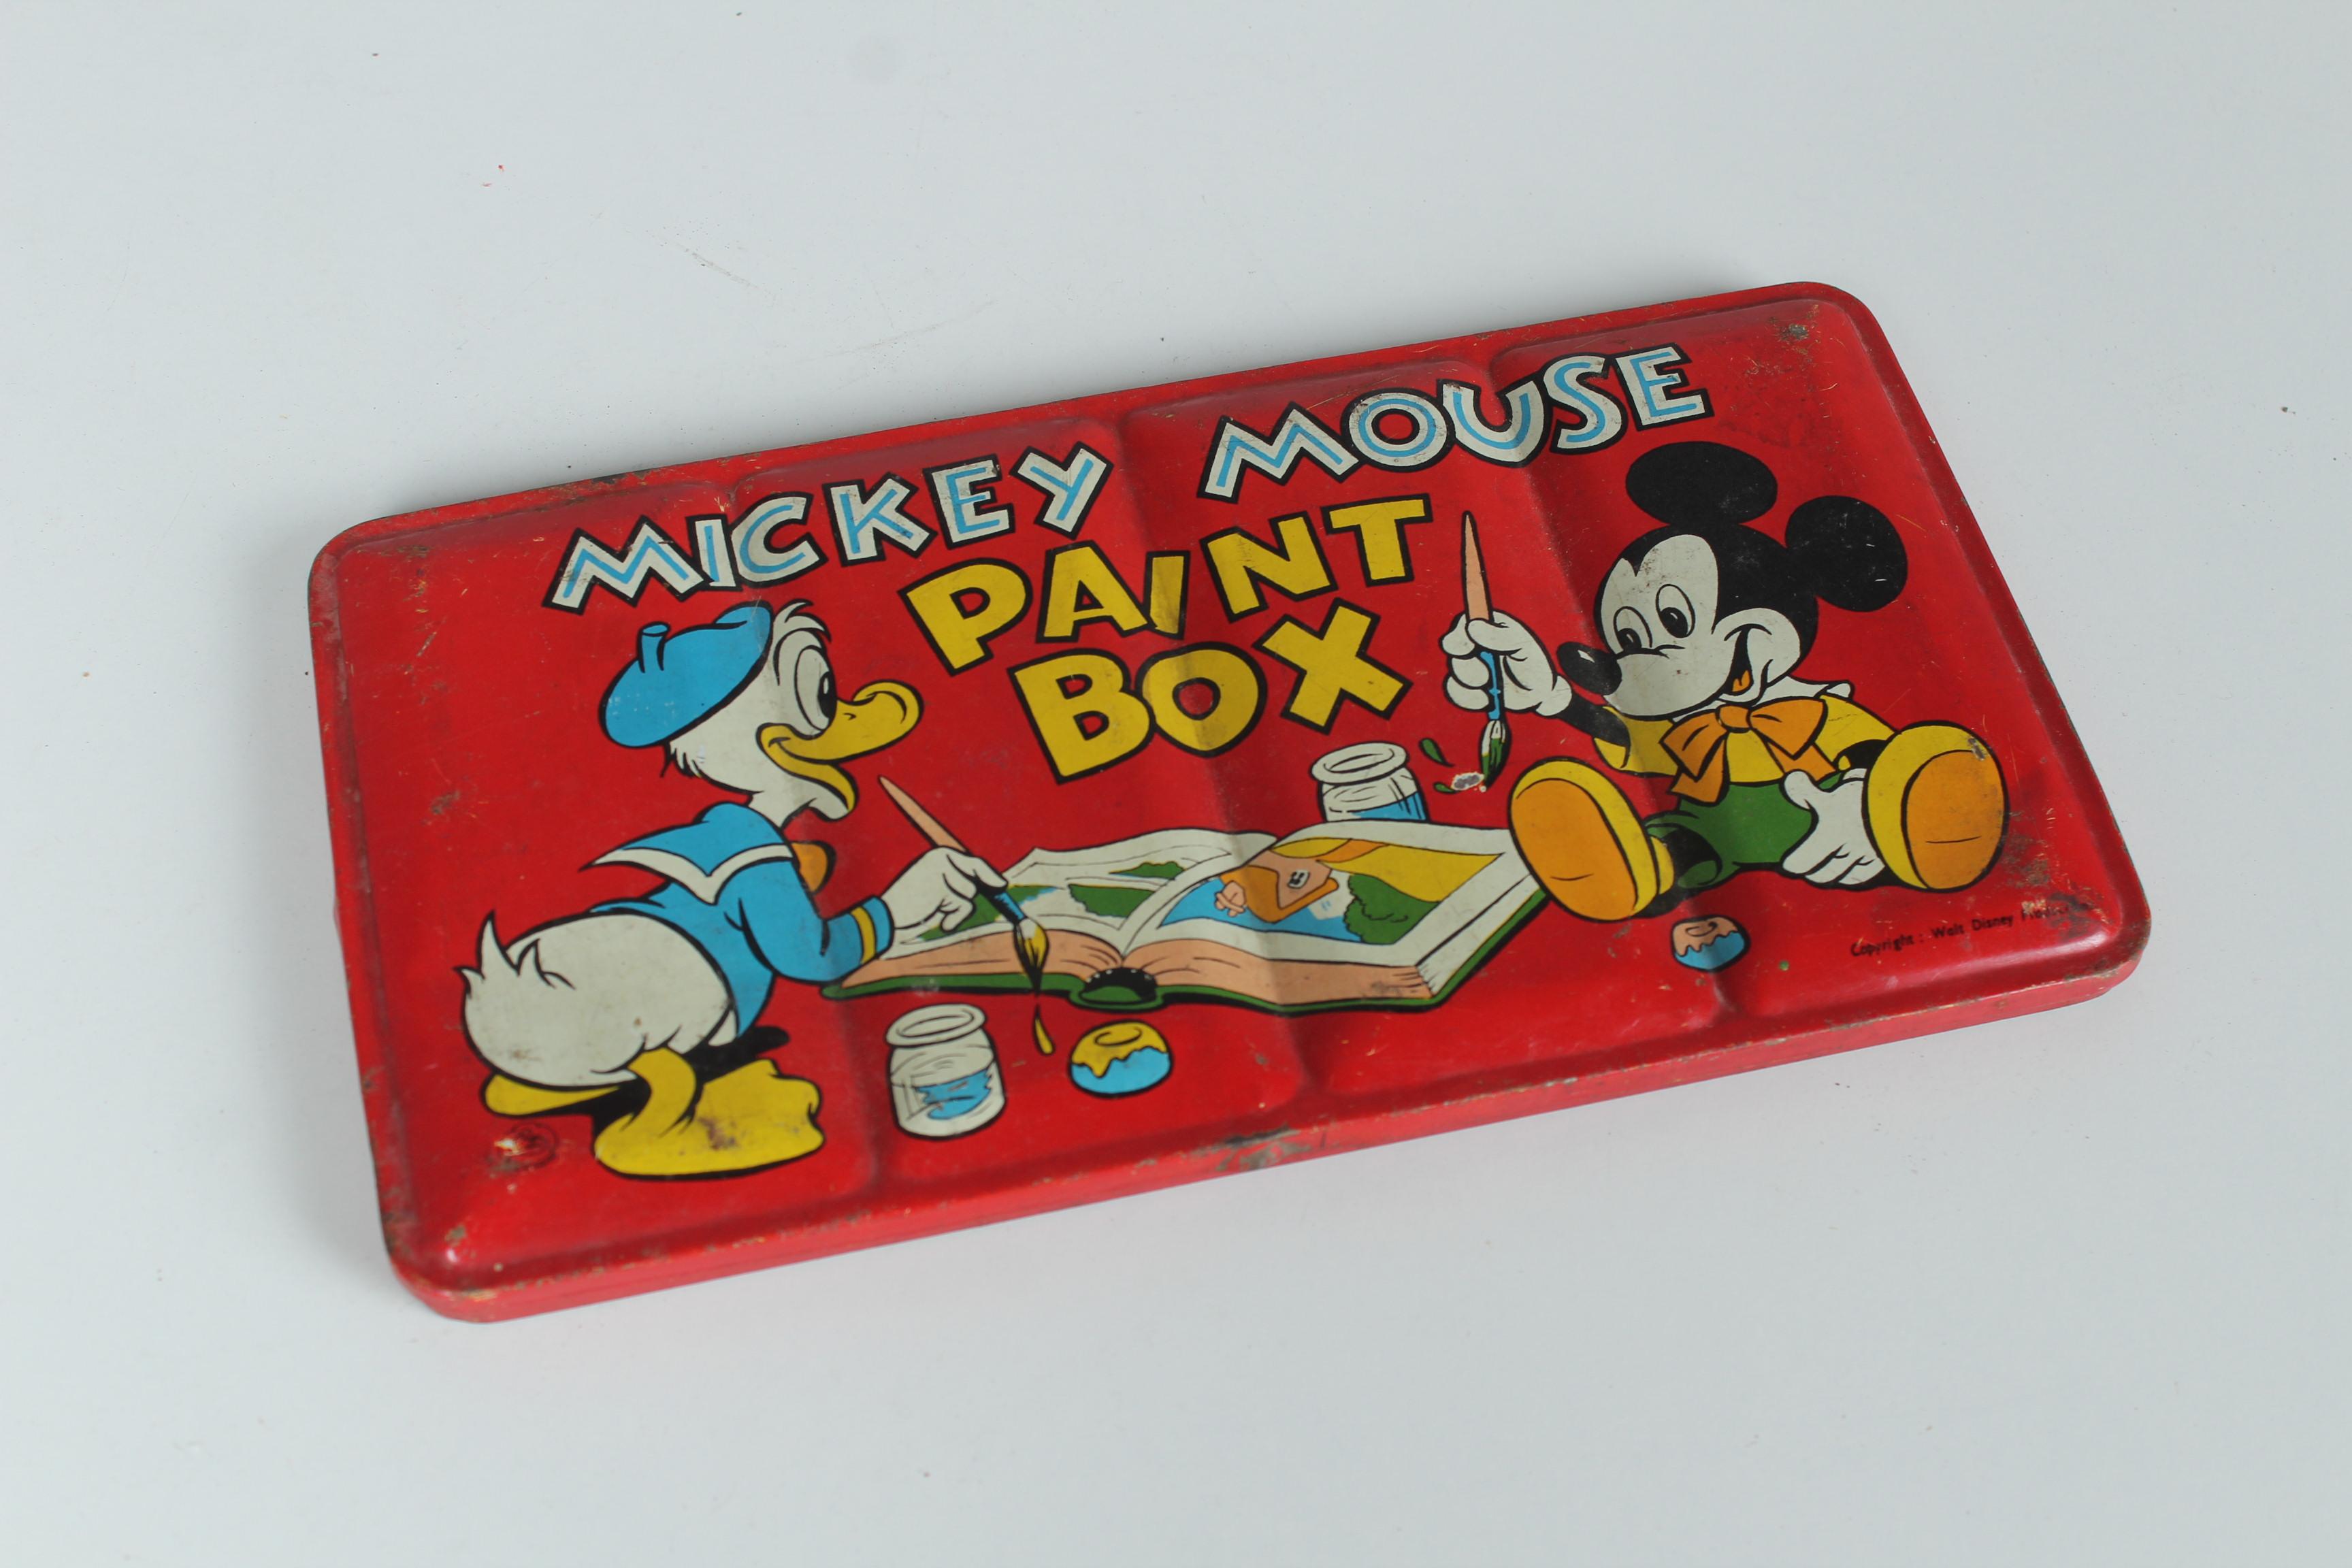 Vintage Paint Box by Disneys Mickey Mouse.
The paint is not supplied.
